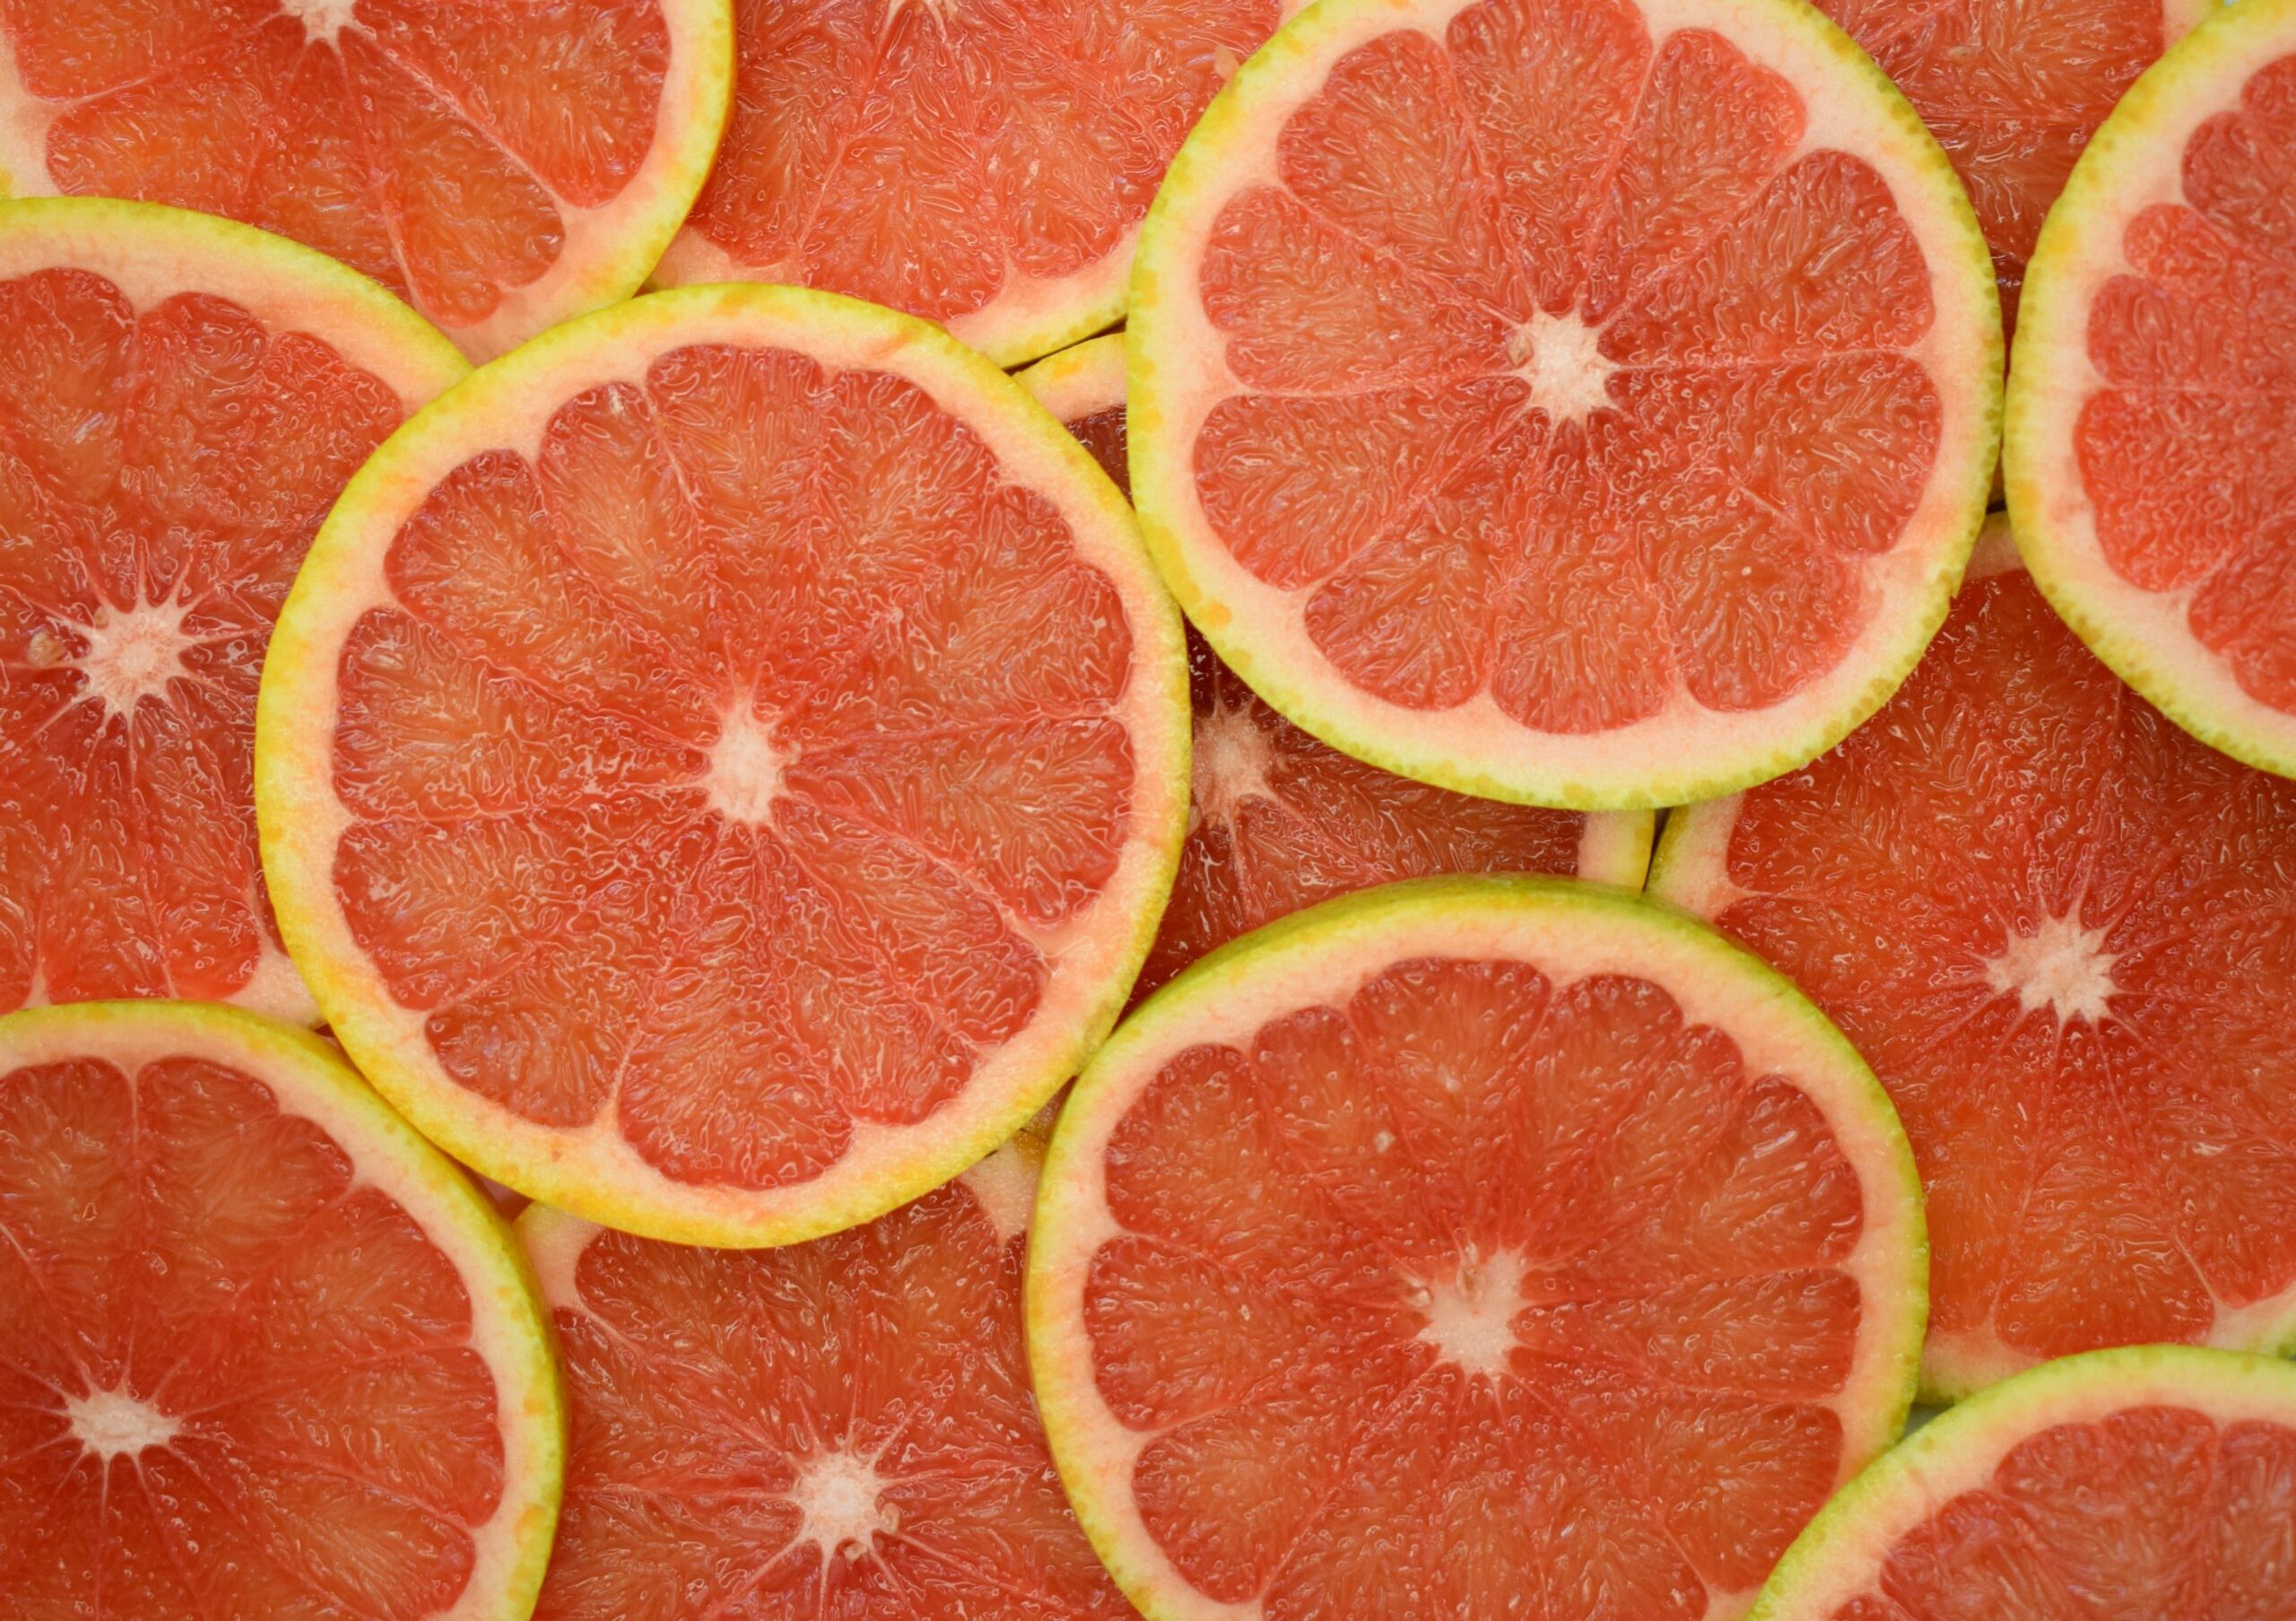 A bunch of grapefruit slices